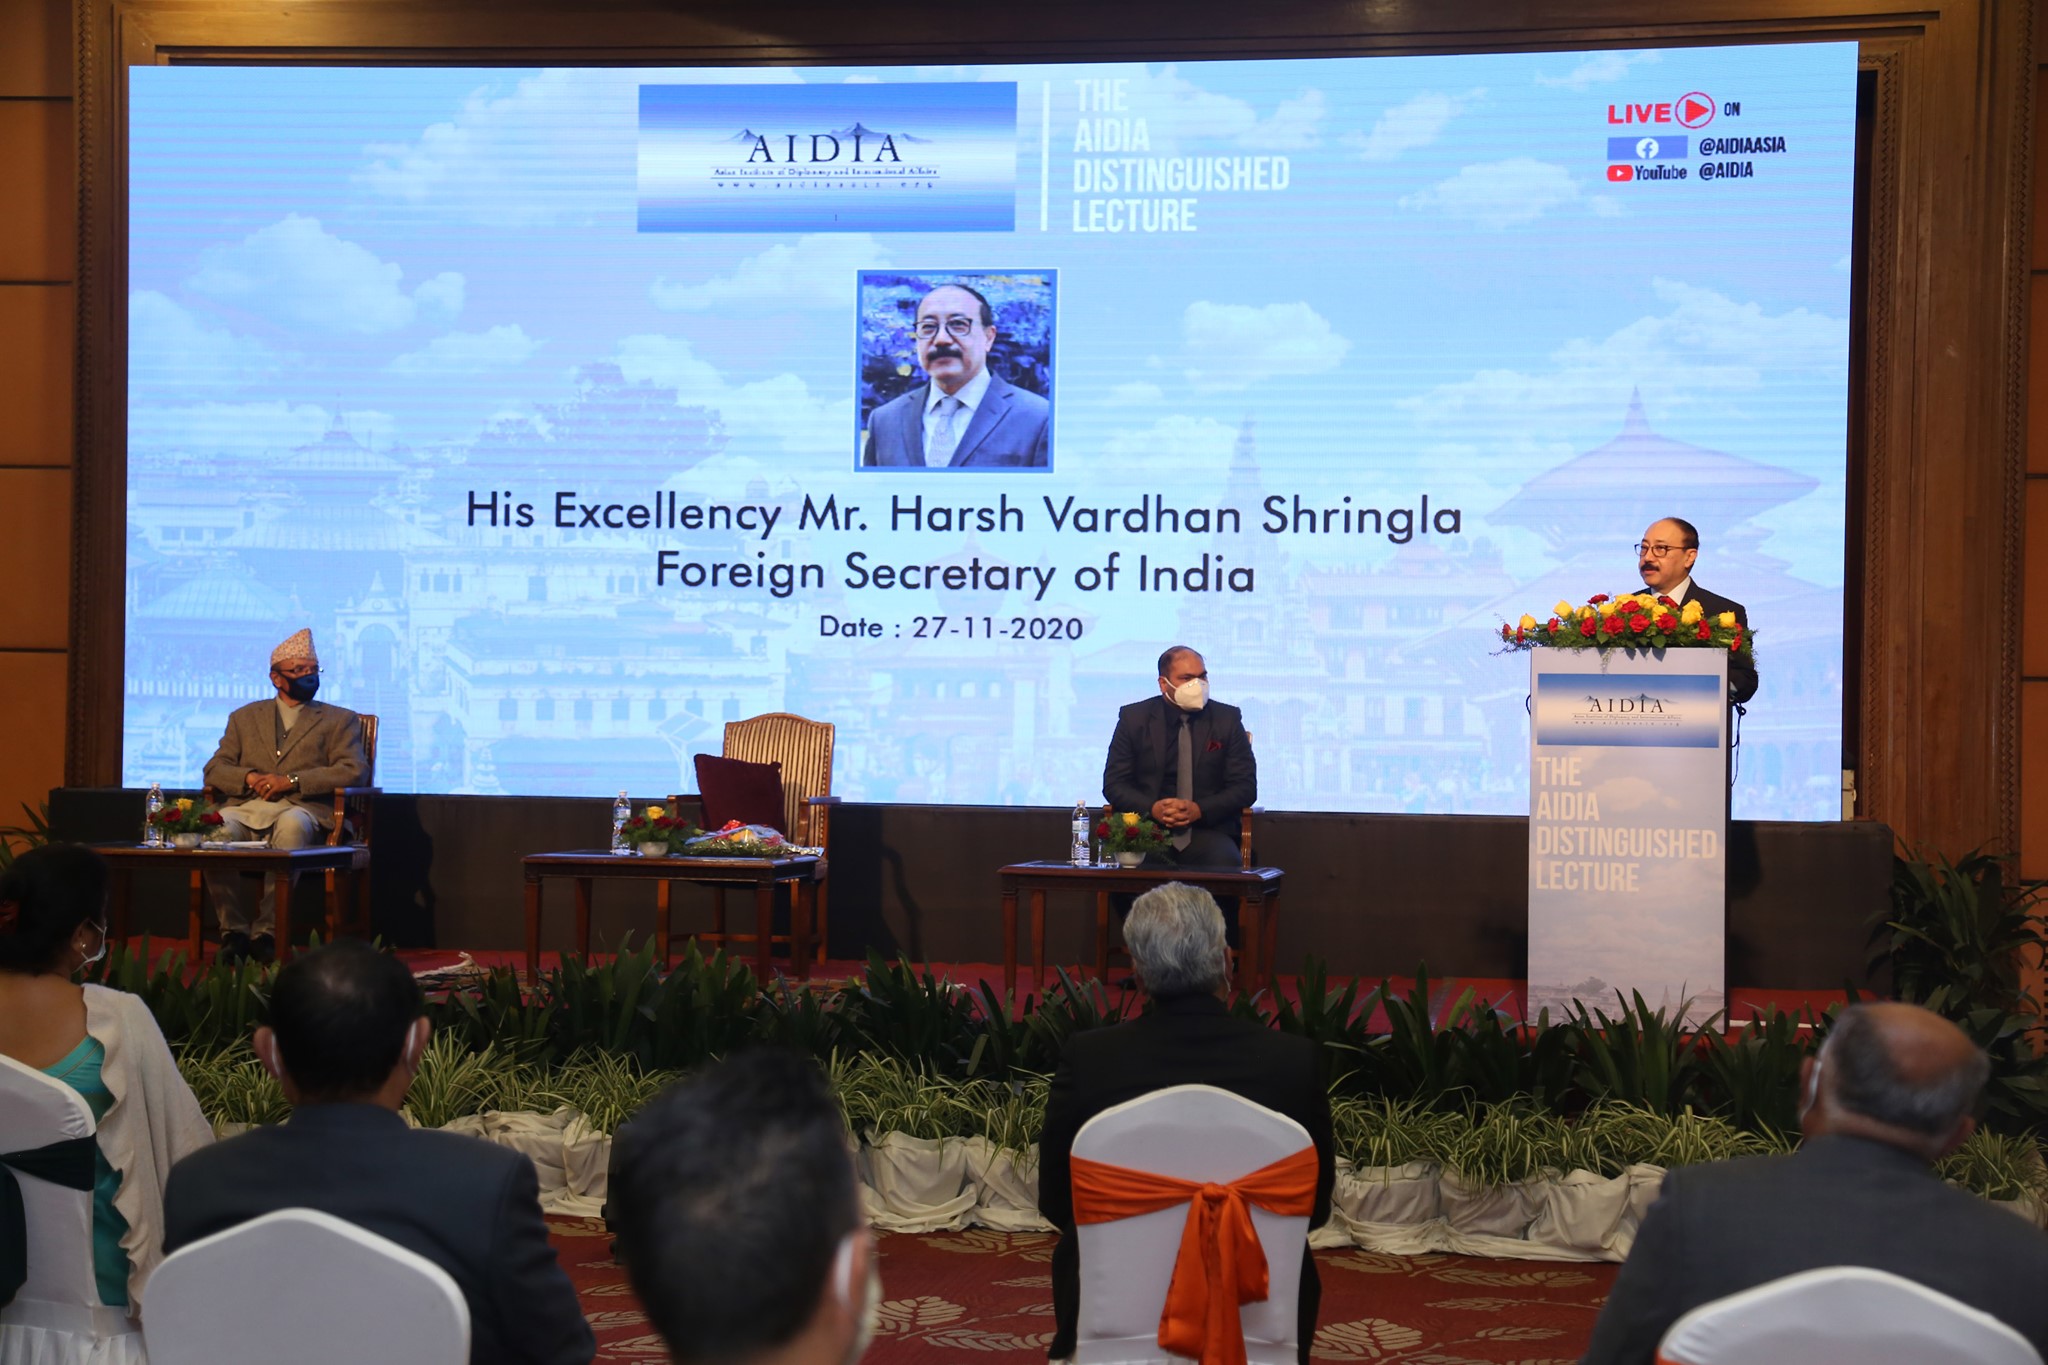 AIDIA Distinguished Lecture by H.E. Mr. Harsh Vardhan Shringla